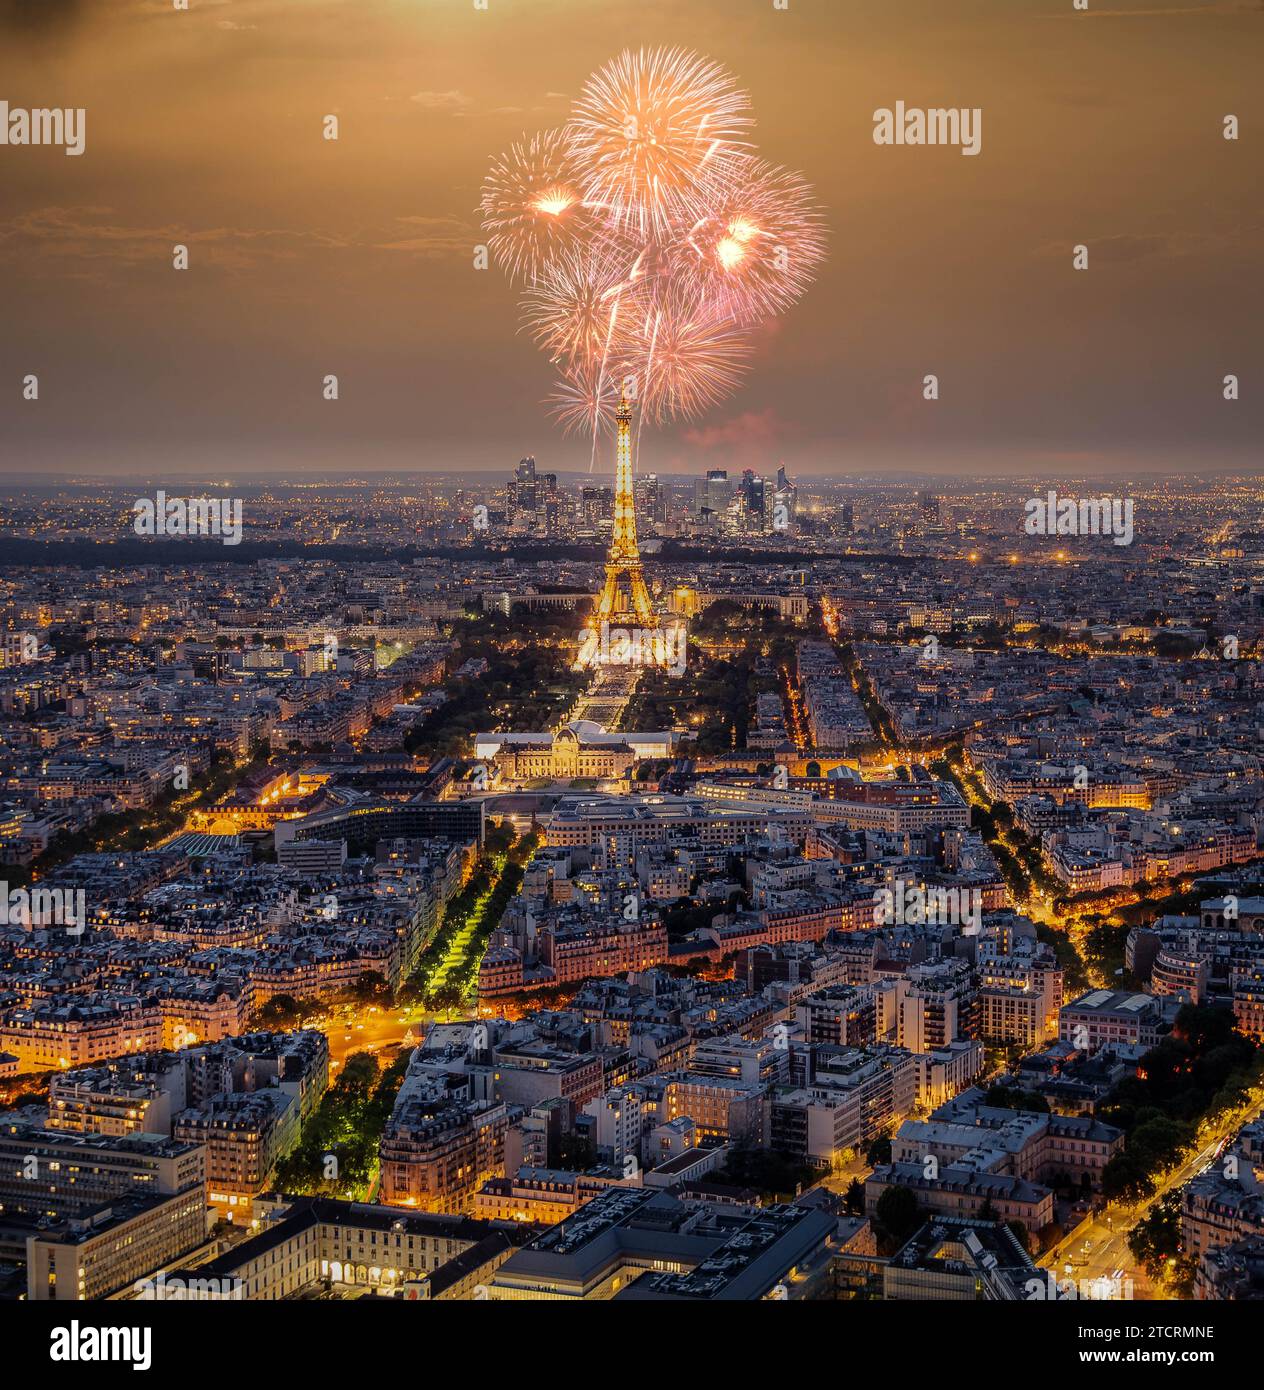 Eiffel tower with fireworks, a celebration of the New Year in Paris, France. High quality photo Stock Photo